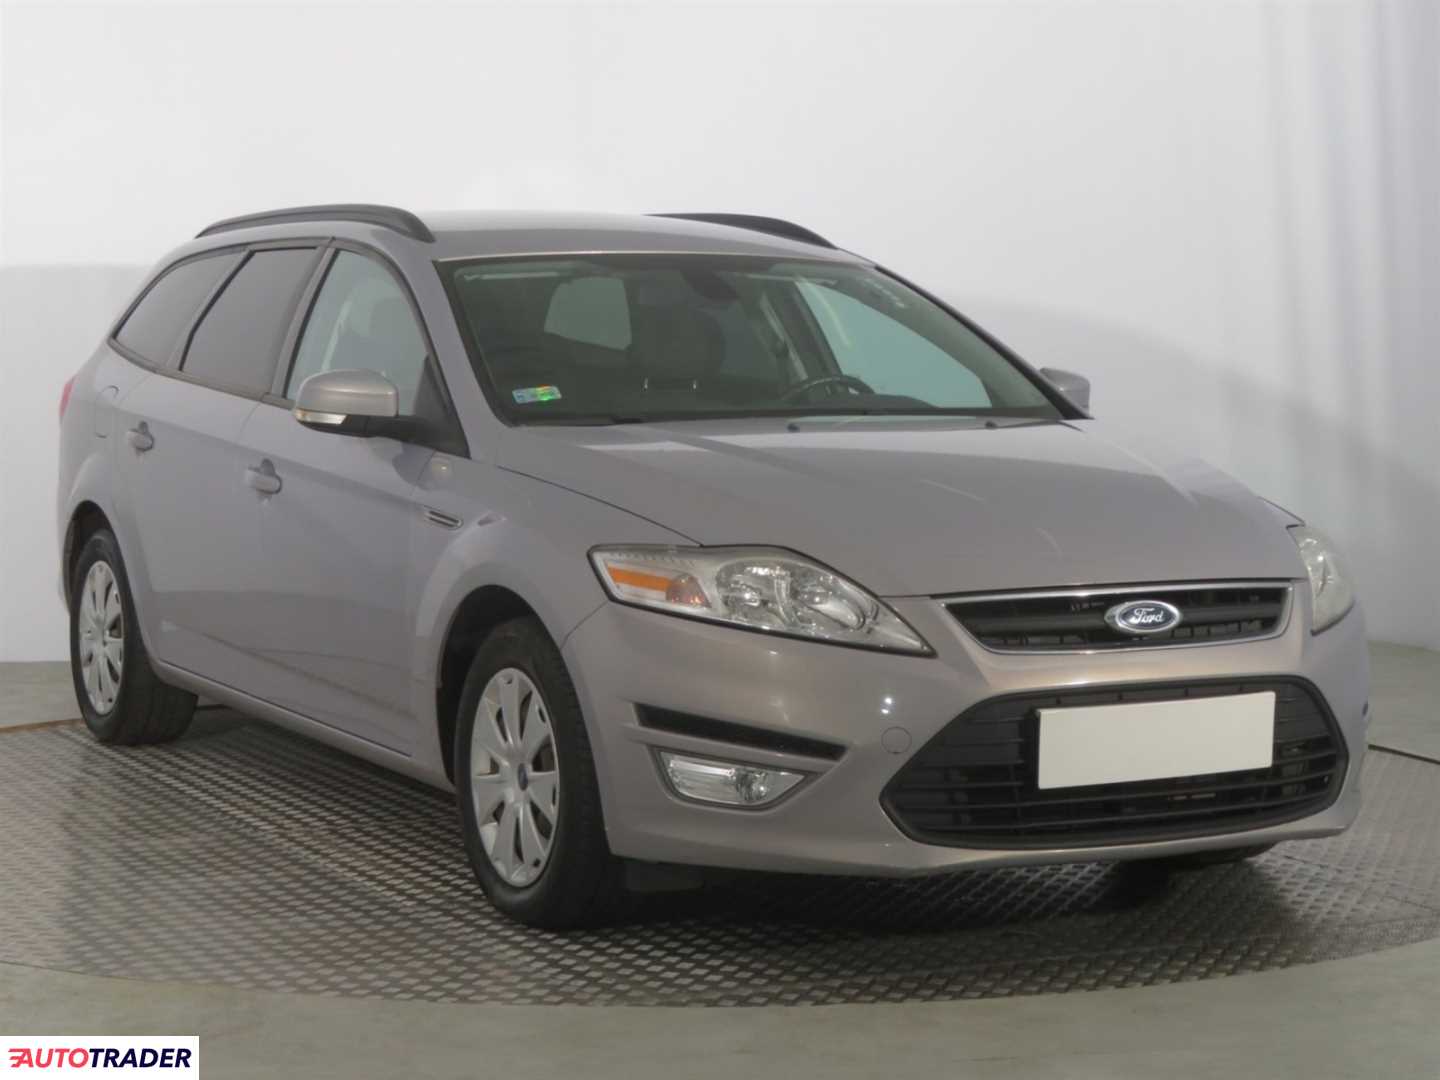 Ford Mondeo 2014 1.6 158 KM